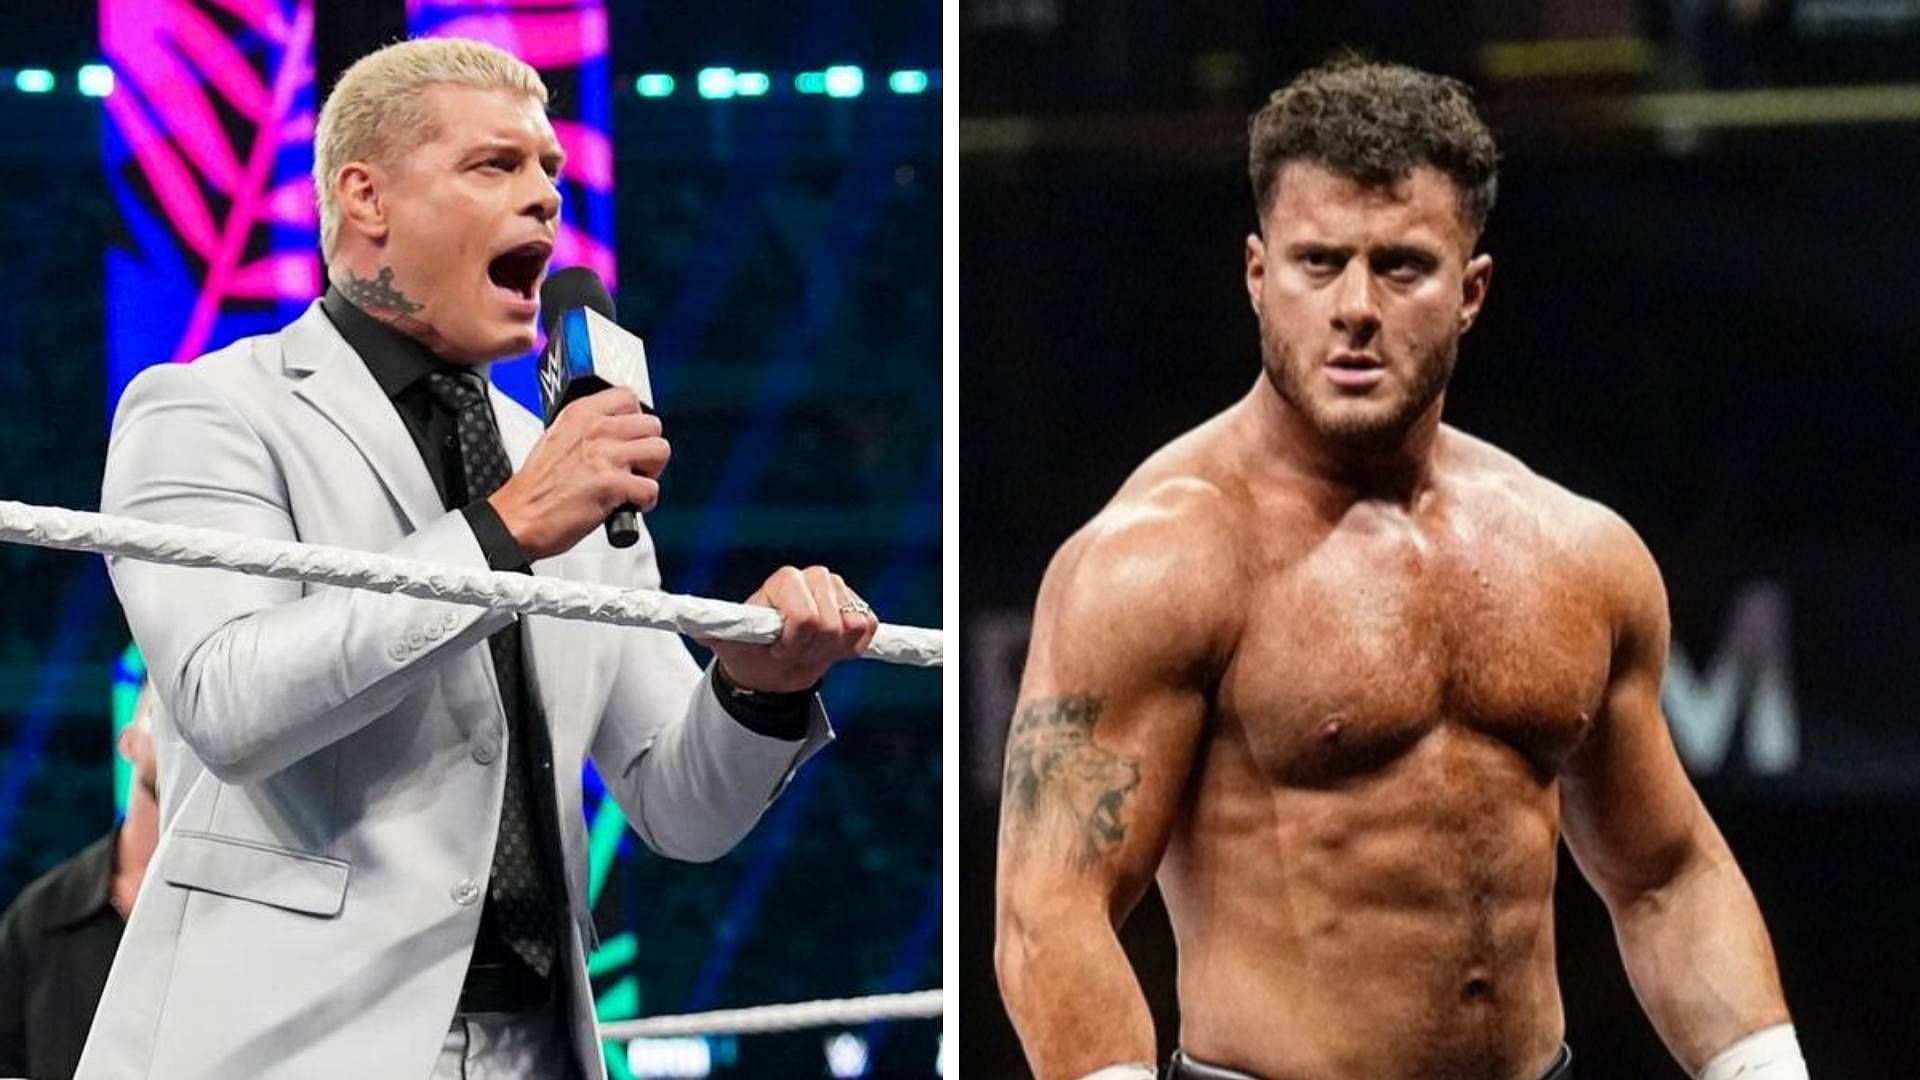 Cody Rhodes and MJF